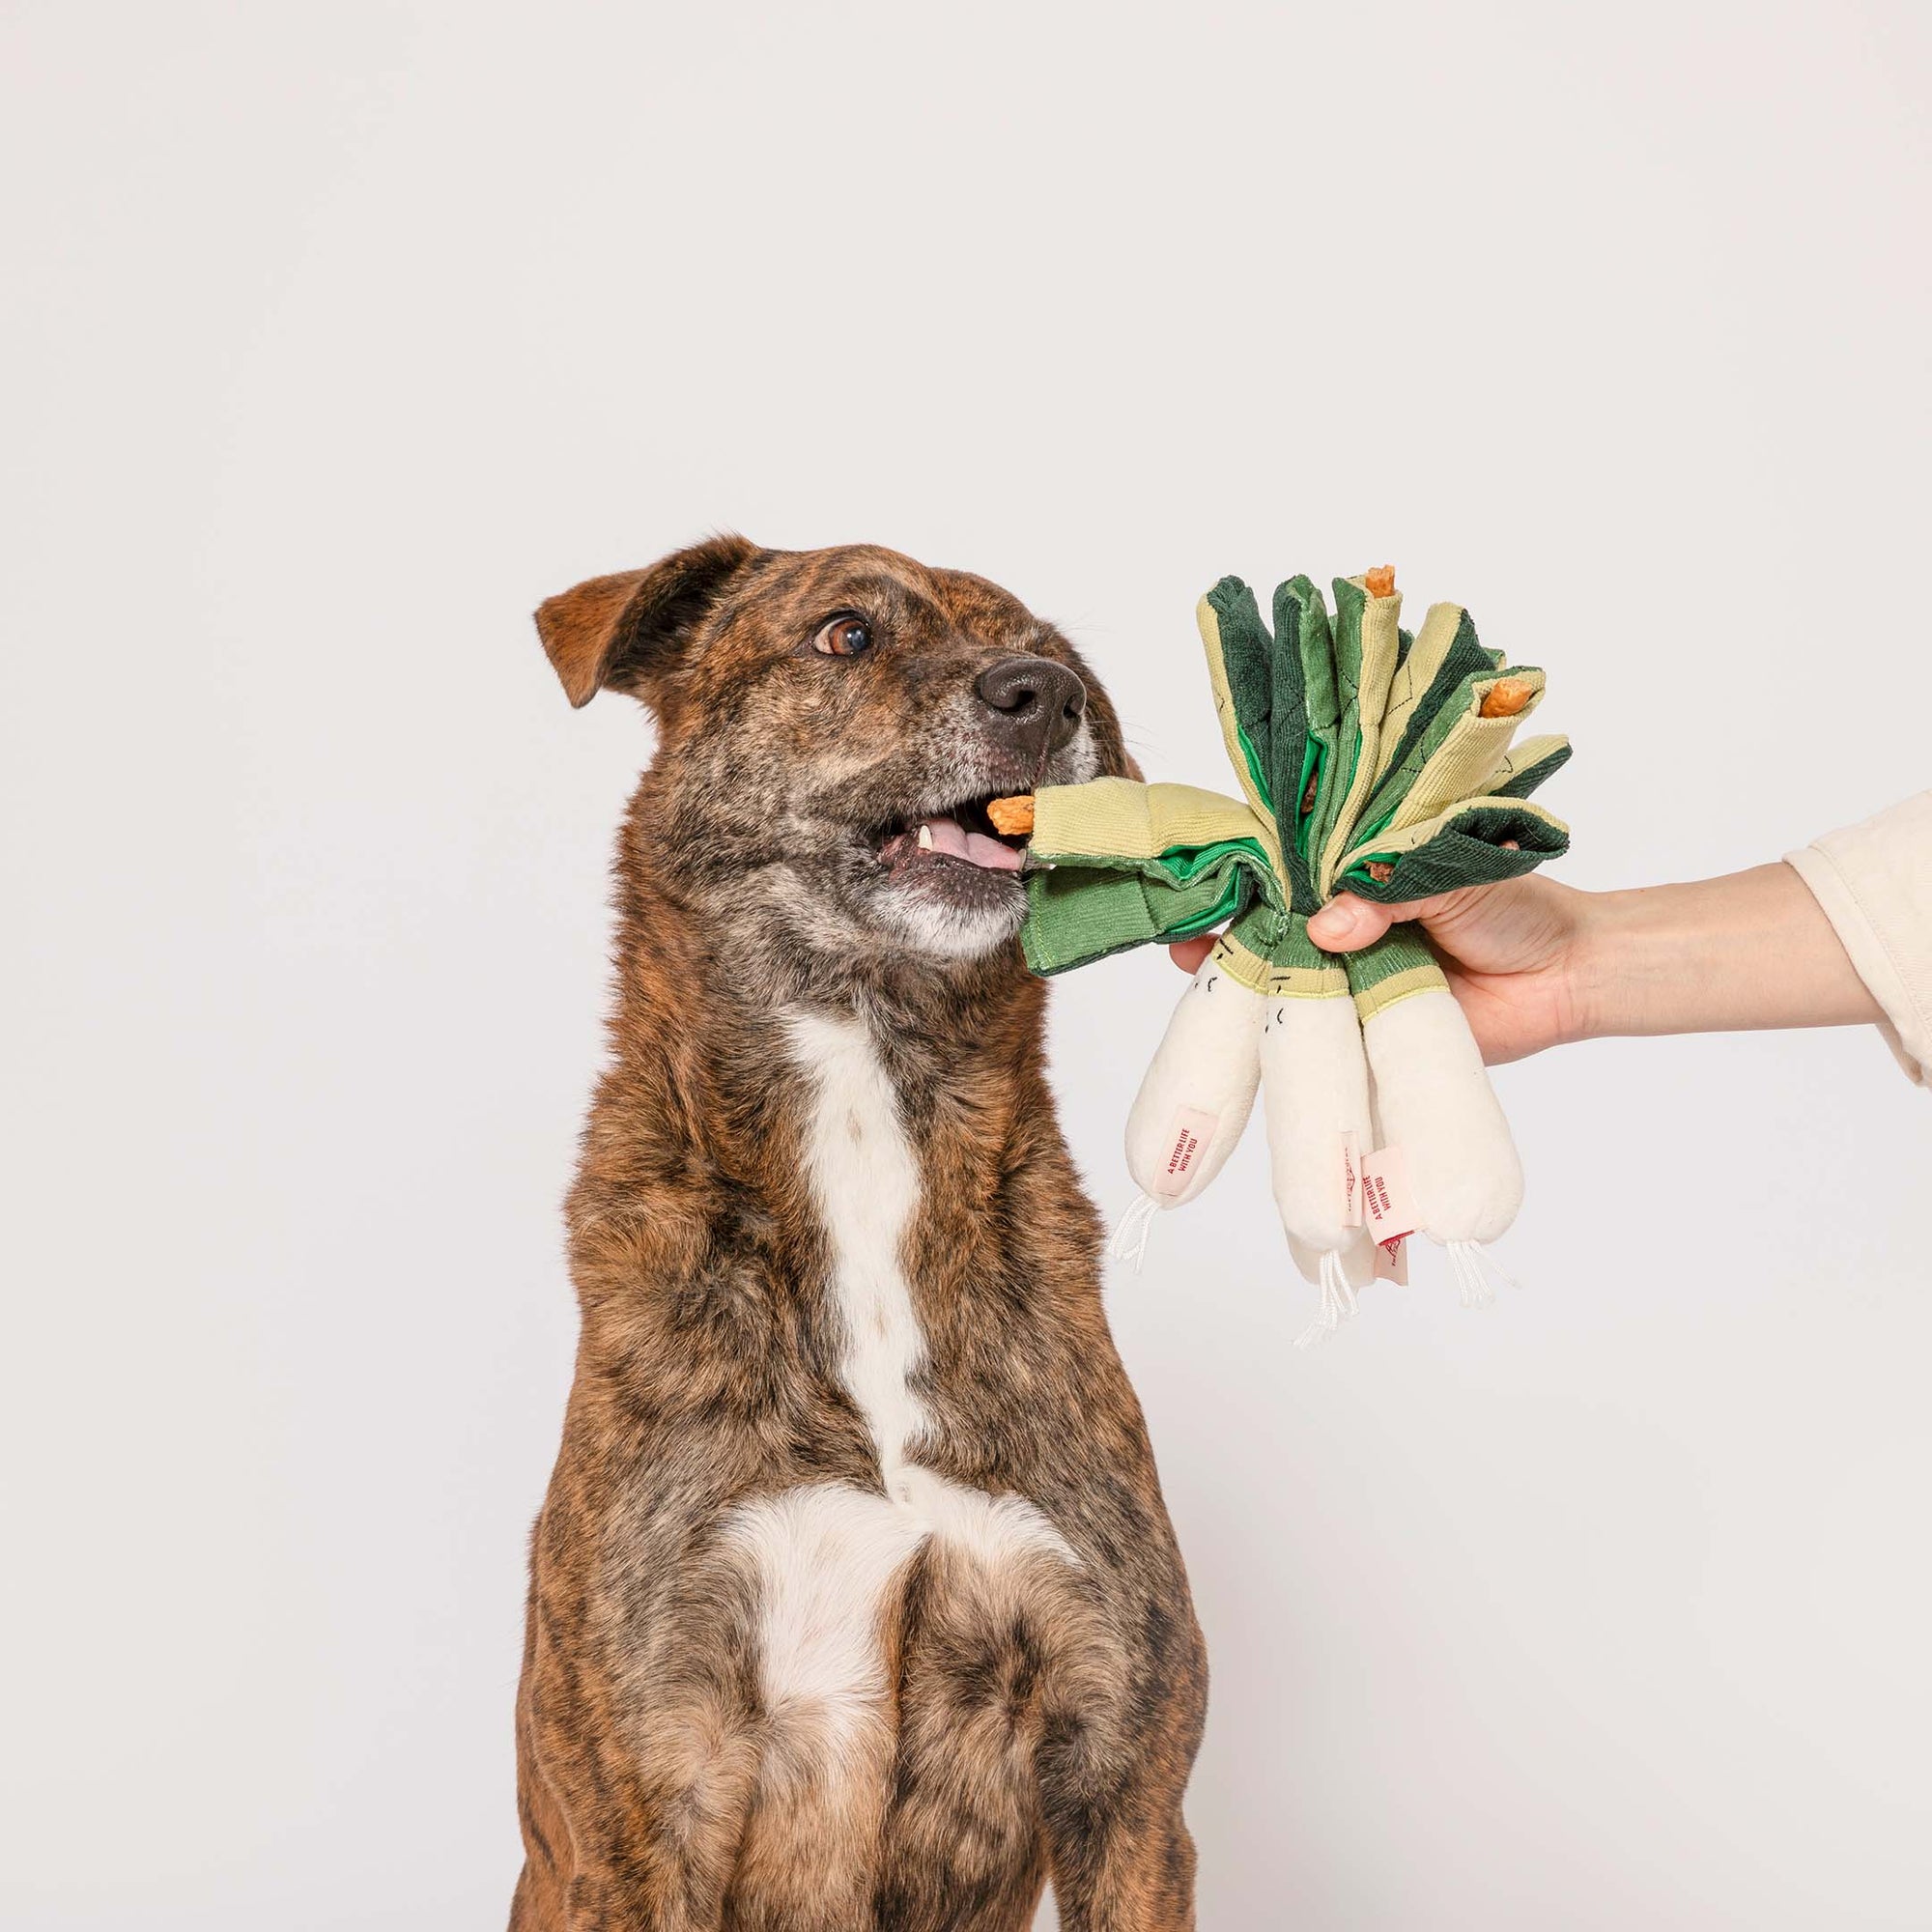 a brindle dog with a focused gaze, standing on its hind legs and gently biting a green onion-shaped dog toy that a human hand is holding. The toy has several layers to mimic the look of a green onion and the dog's interaction with it suggests a playful and engaging training or play session.